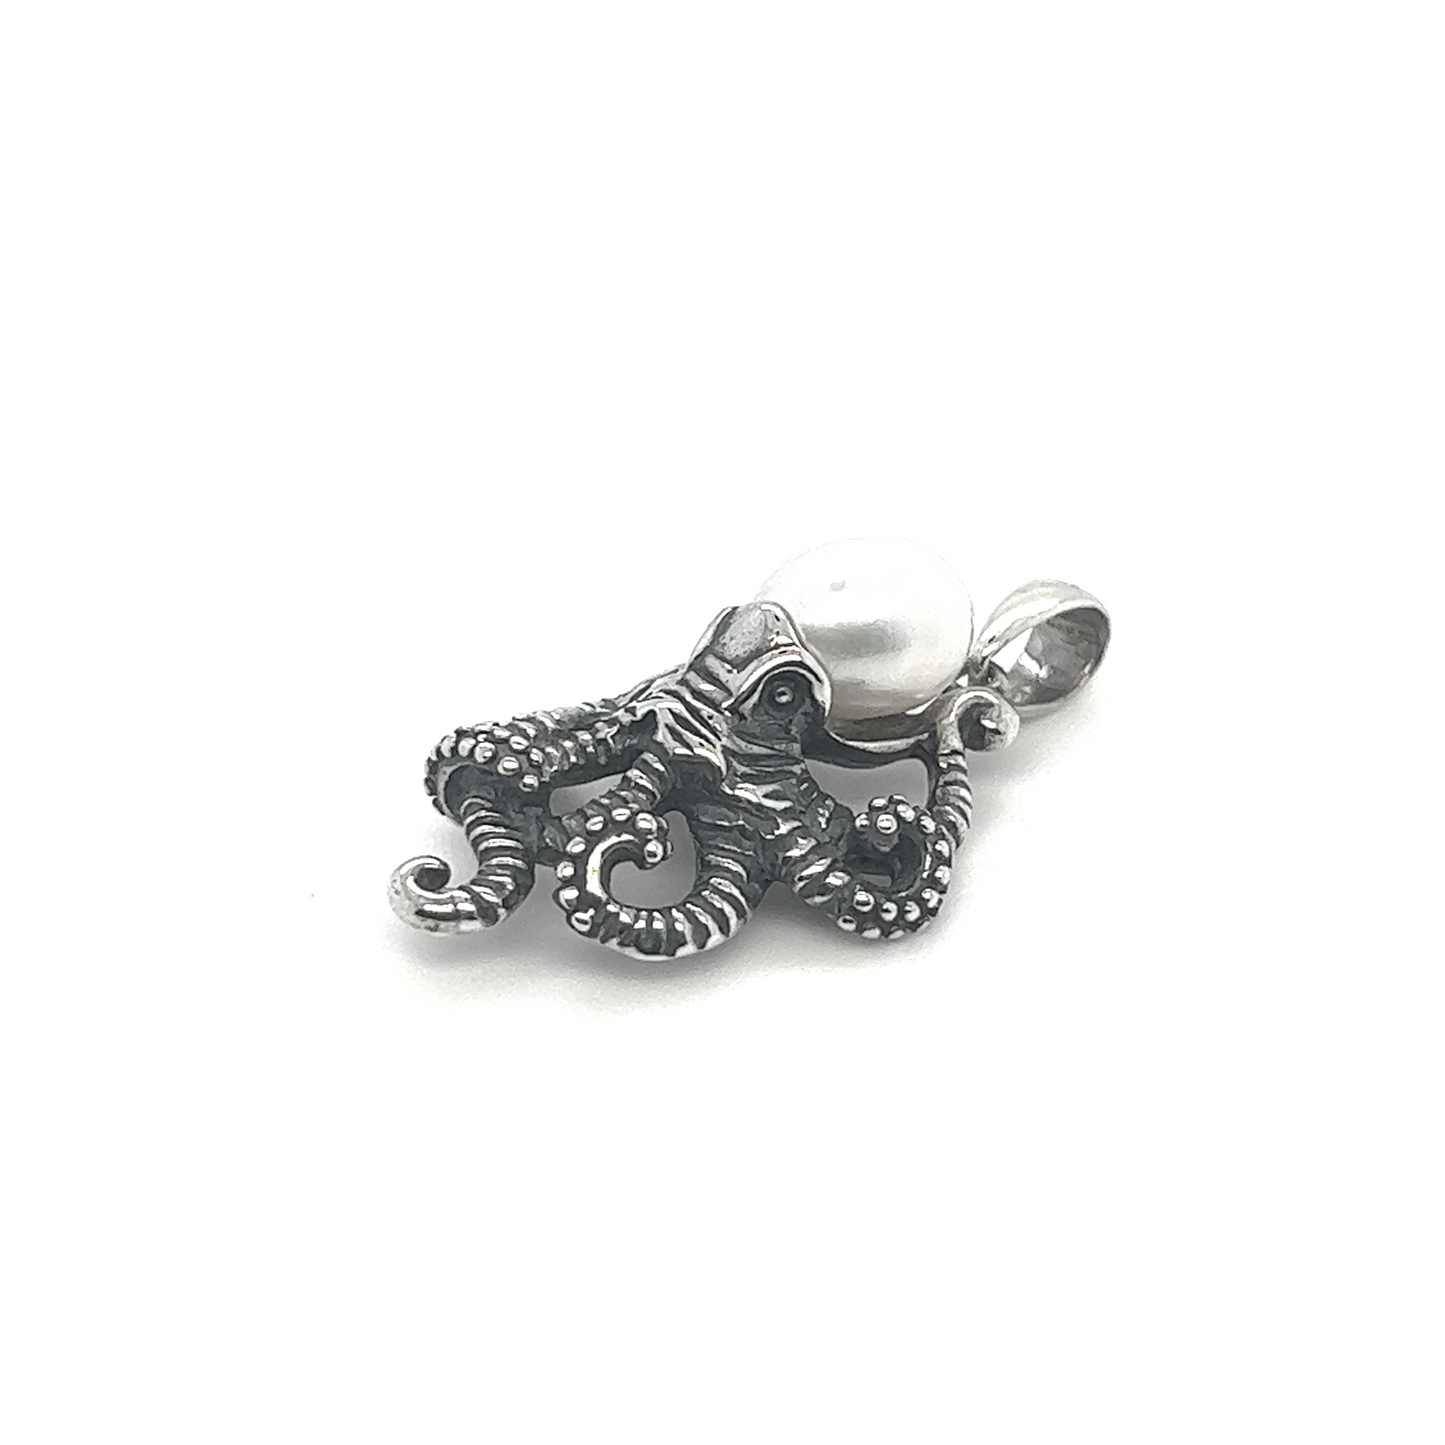 An Enchanting Octopus Pendant With Pearl by Super Silver on a white background with a pearl accent.